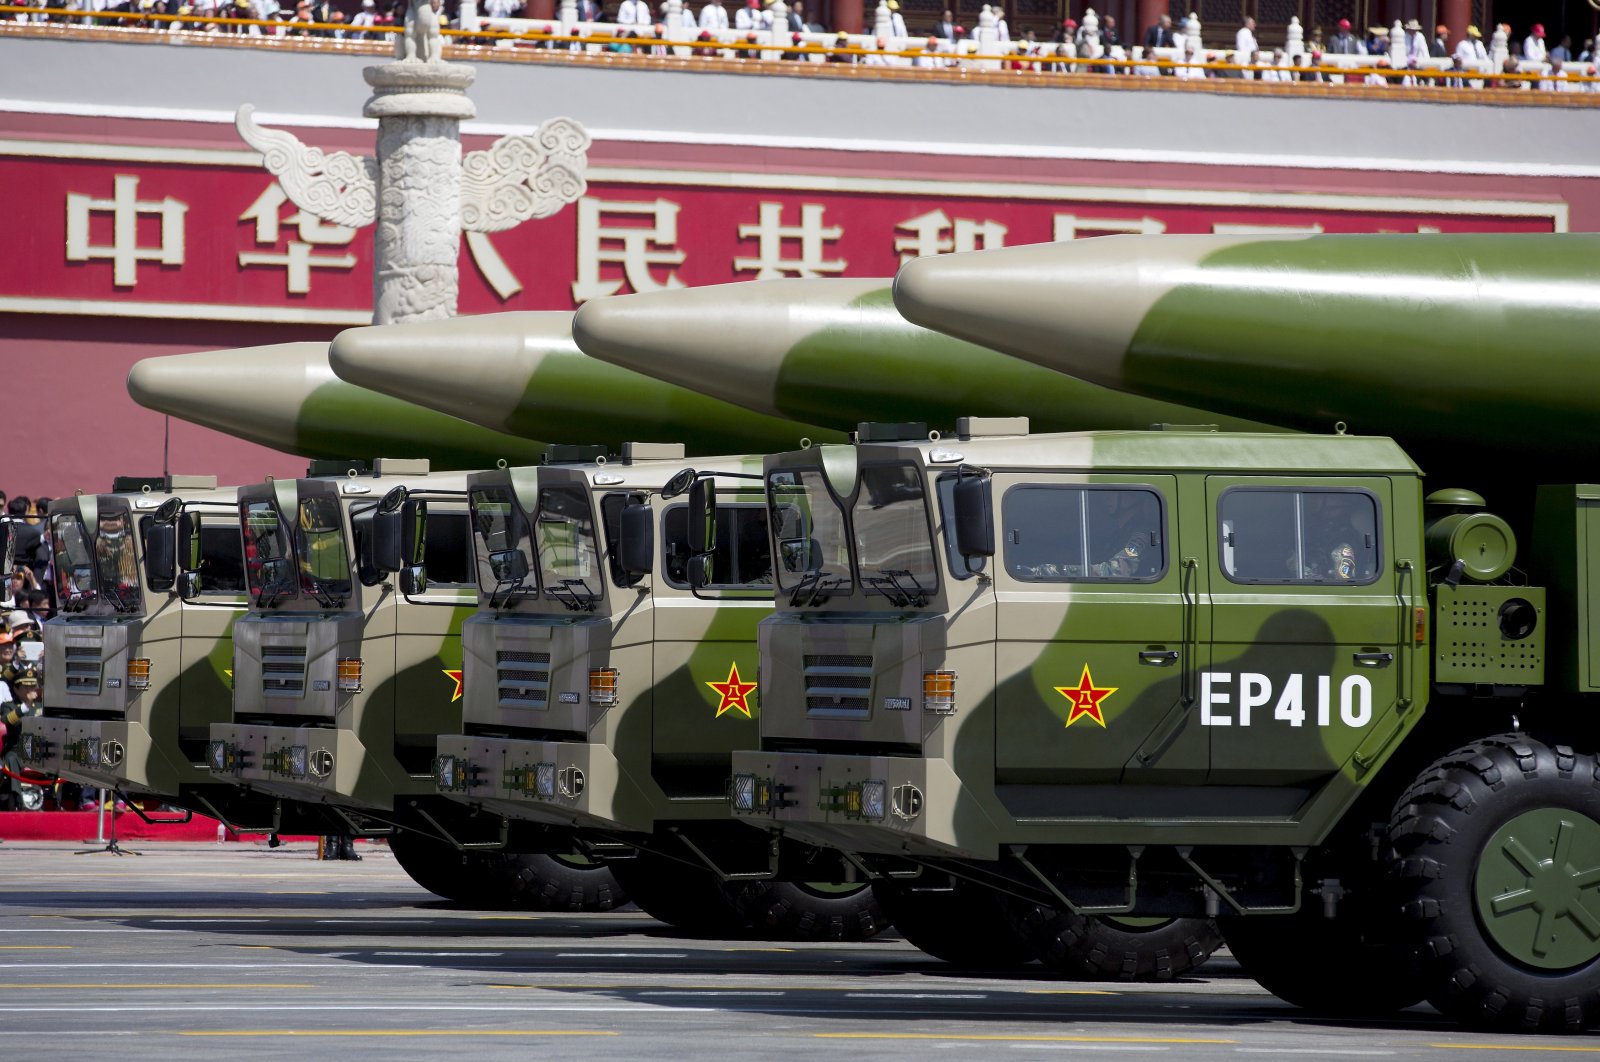 Military vehicles carrying DF-26 ballistic missiles travel past Tiananmen Gate during a military parade to commemorate the 70th anniversary of the end of World War II in Beijing, China, Sept. 3, 2015. (Reuters Photo)